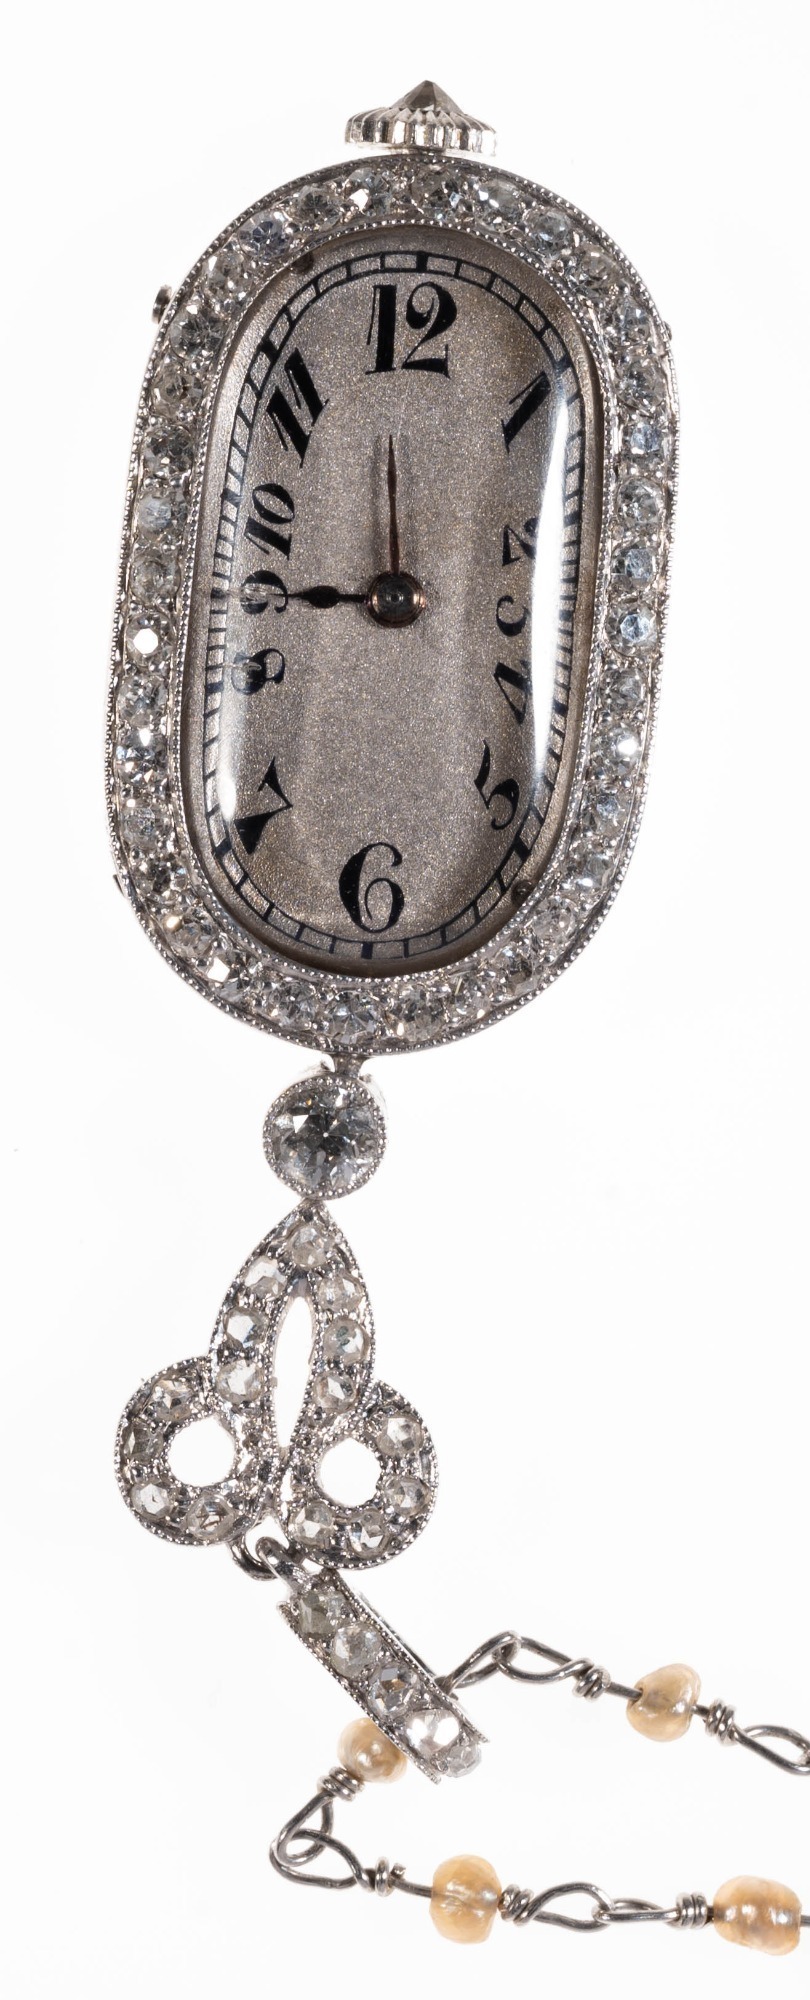 ART DECO PLATINUM AND DIAMOND PENDANT WATCH WITH PLATINUM AND SEED PEARL CHAIN - 3